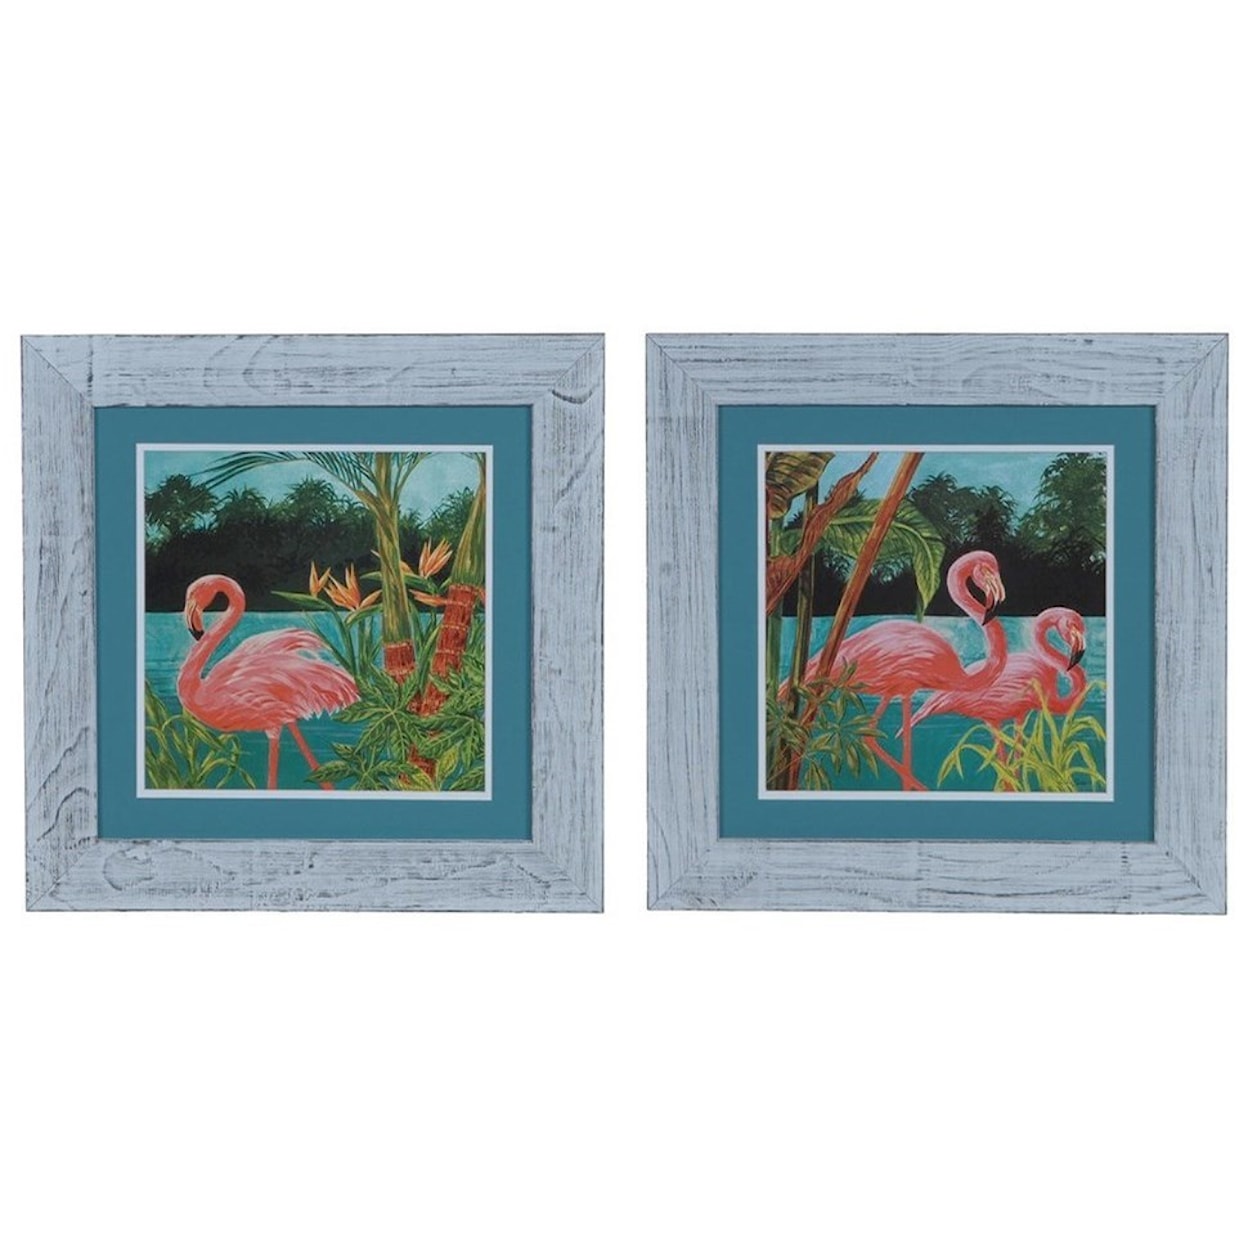 Crestview Collection Prints and Paintings Flamingo 1 & 2 (Set)